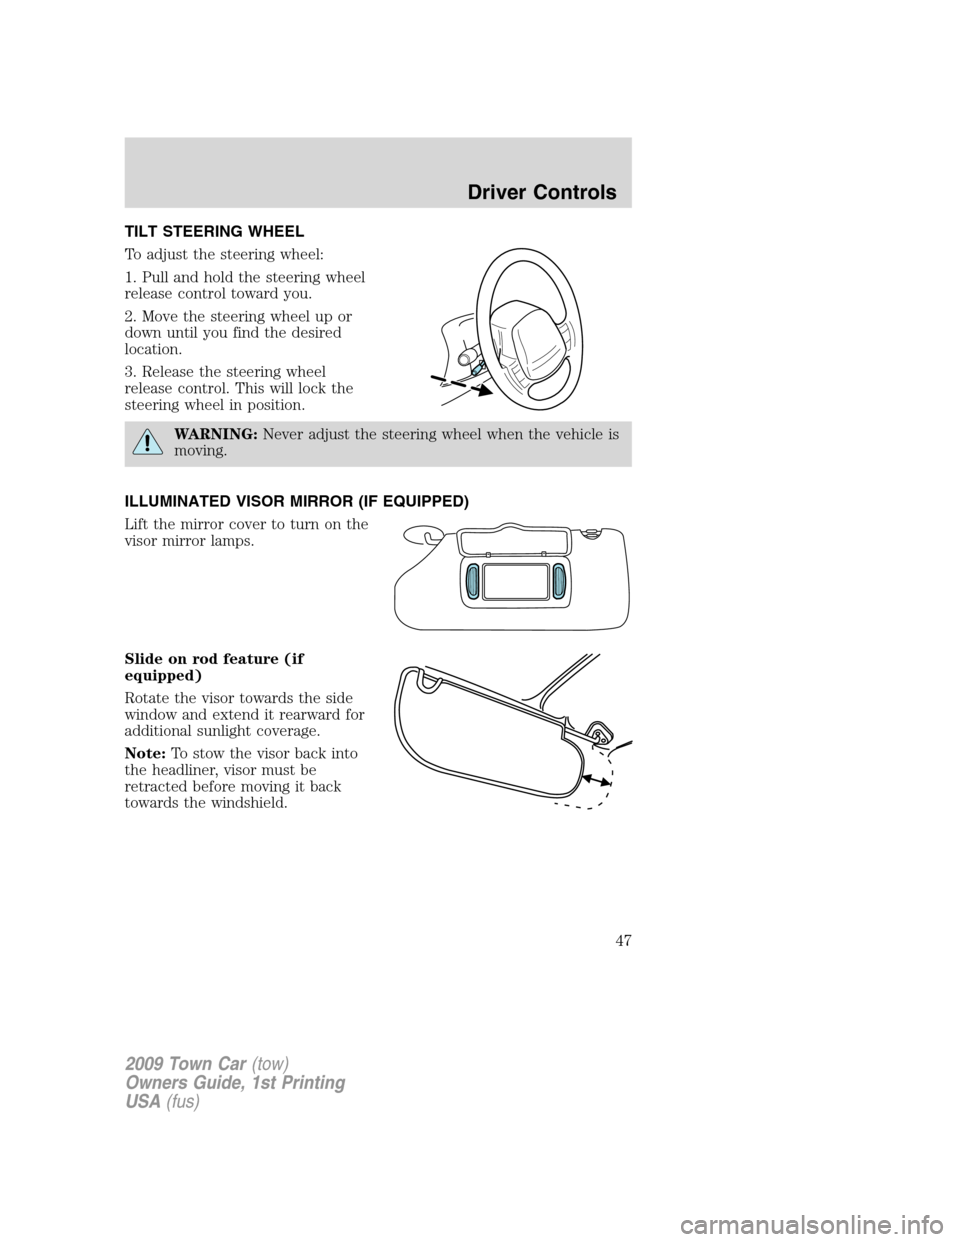 LINCOLN TOWN CAR 2009 Service Manual TILT STEERING WHEEL
To adjust the steering wheel:
1. Pull and hold the steering wheel
release control toward you.
2. Move the steering wheel up or
down until you find the desired
location.
3. Release 